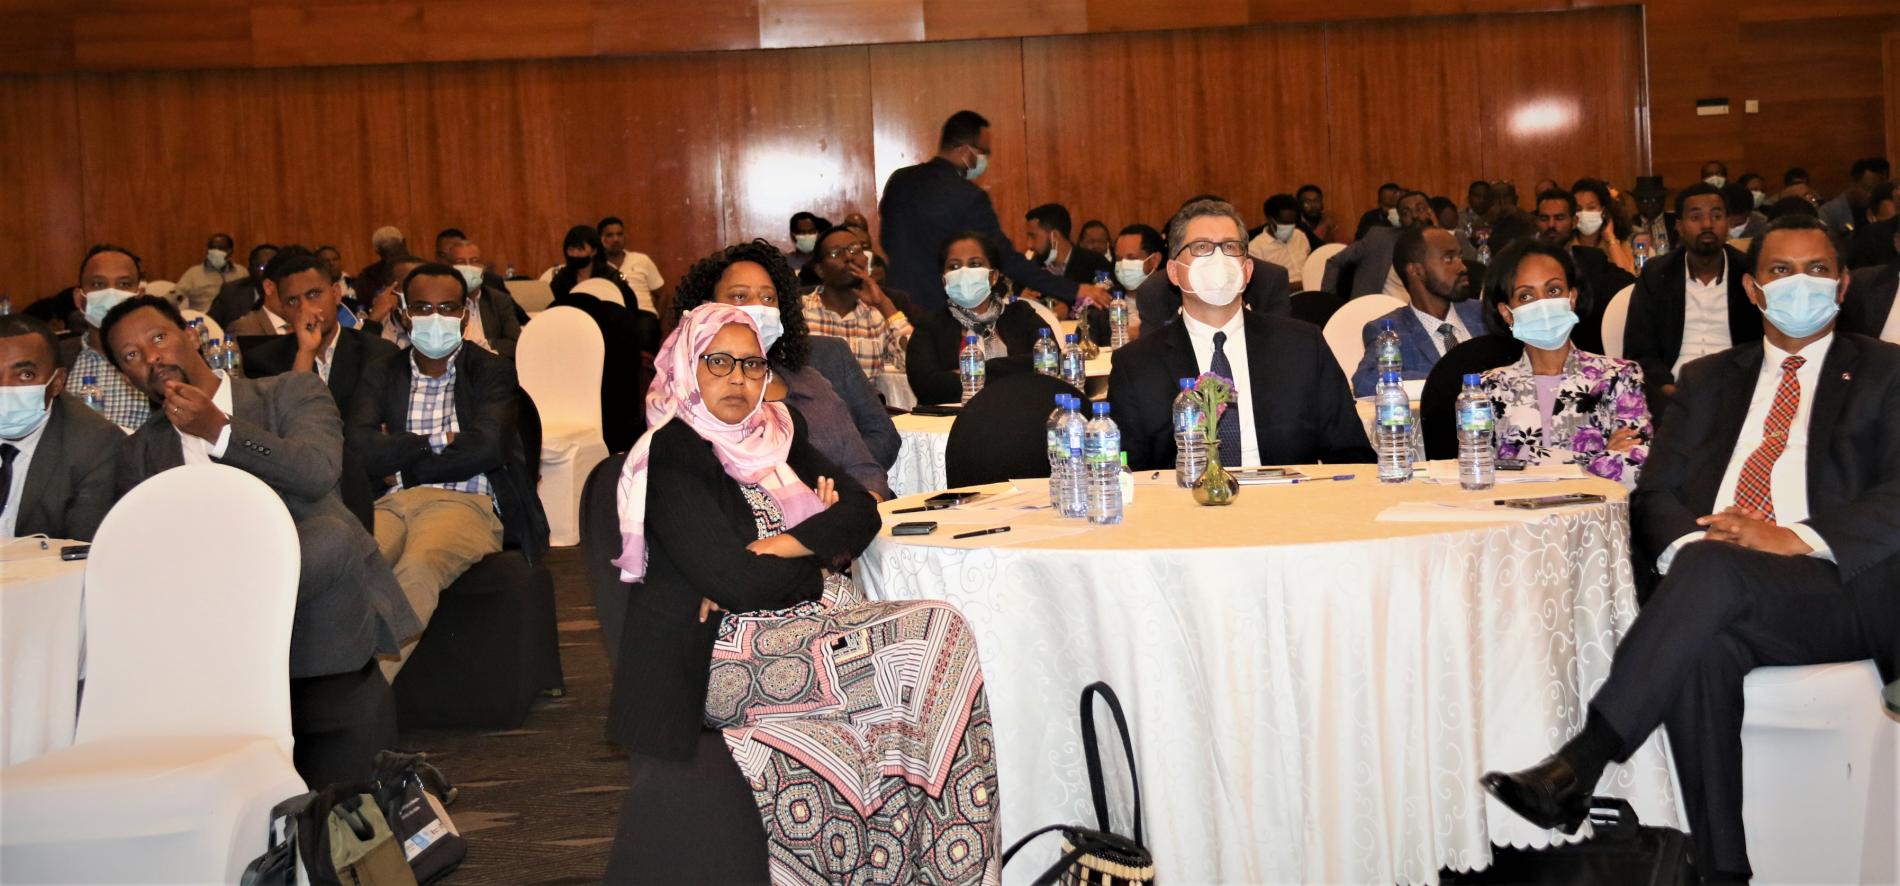 The Ethiopian Ministry of Health launches a five-year national health equity strategy at a high-level advocacy workshop on health equity